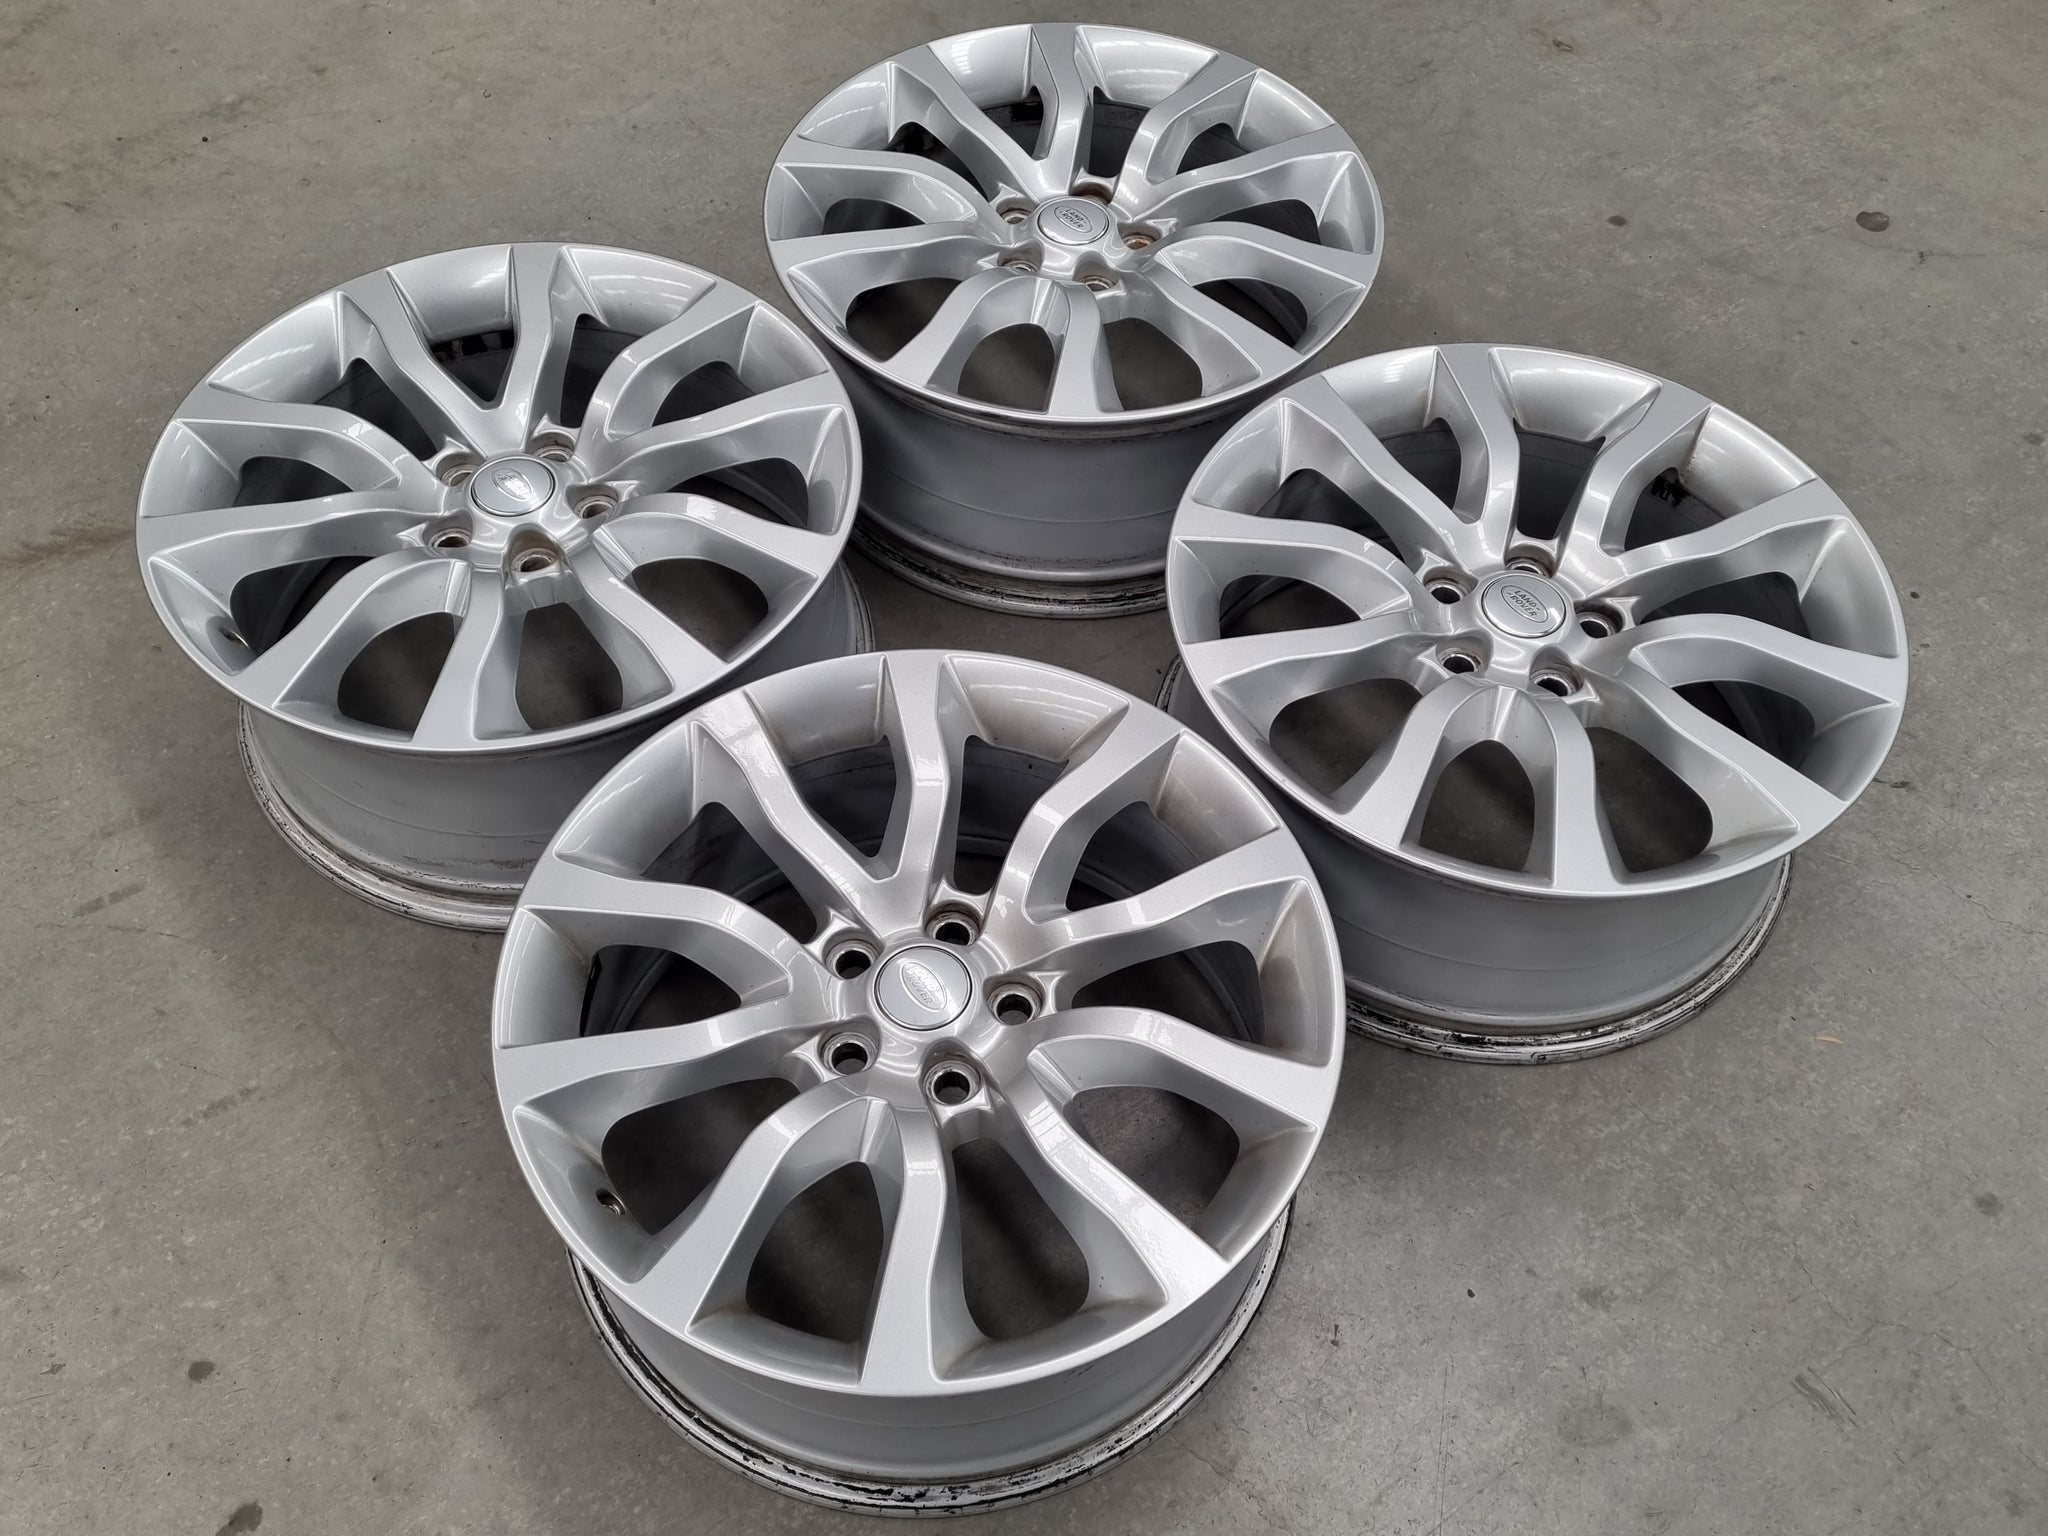 Load image into Gallery viewer, Genuine Range Rover Sport 20 Inch Alloy Wheels Set of 4
